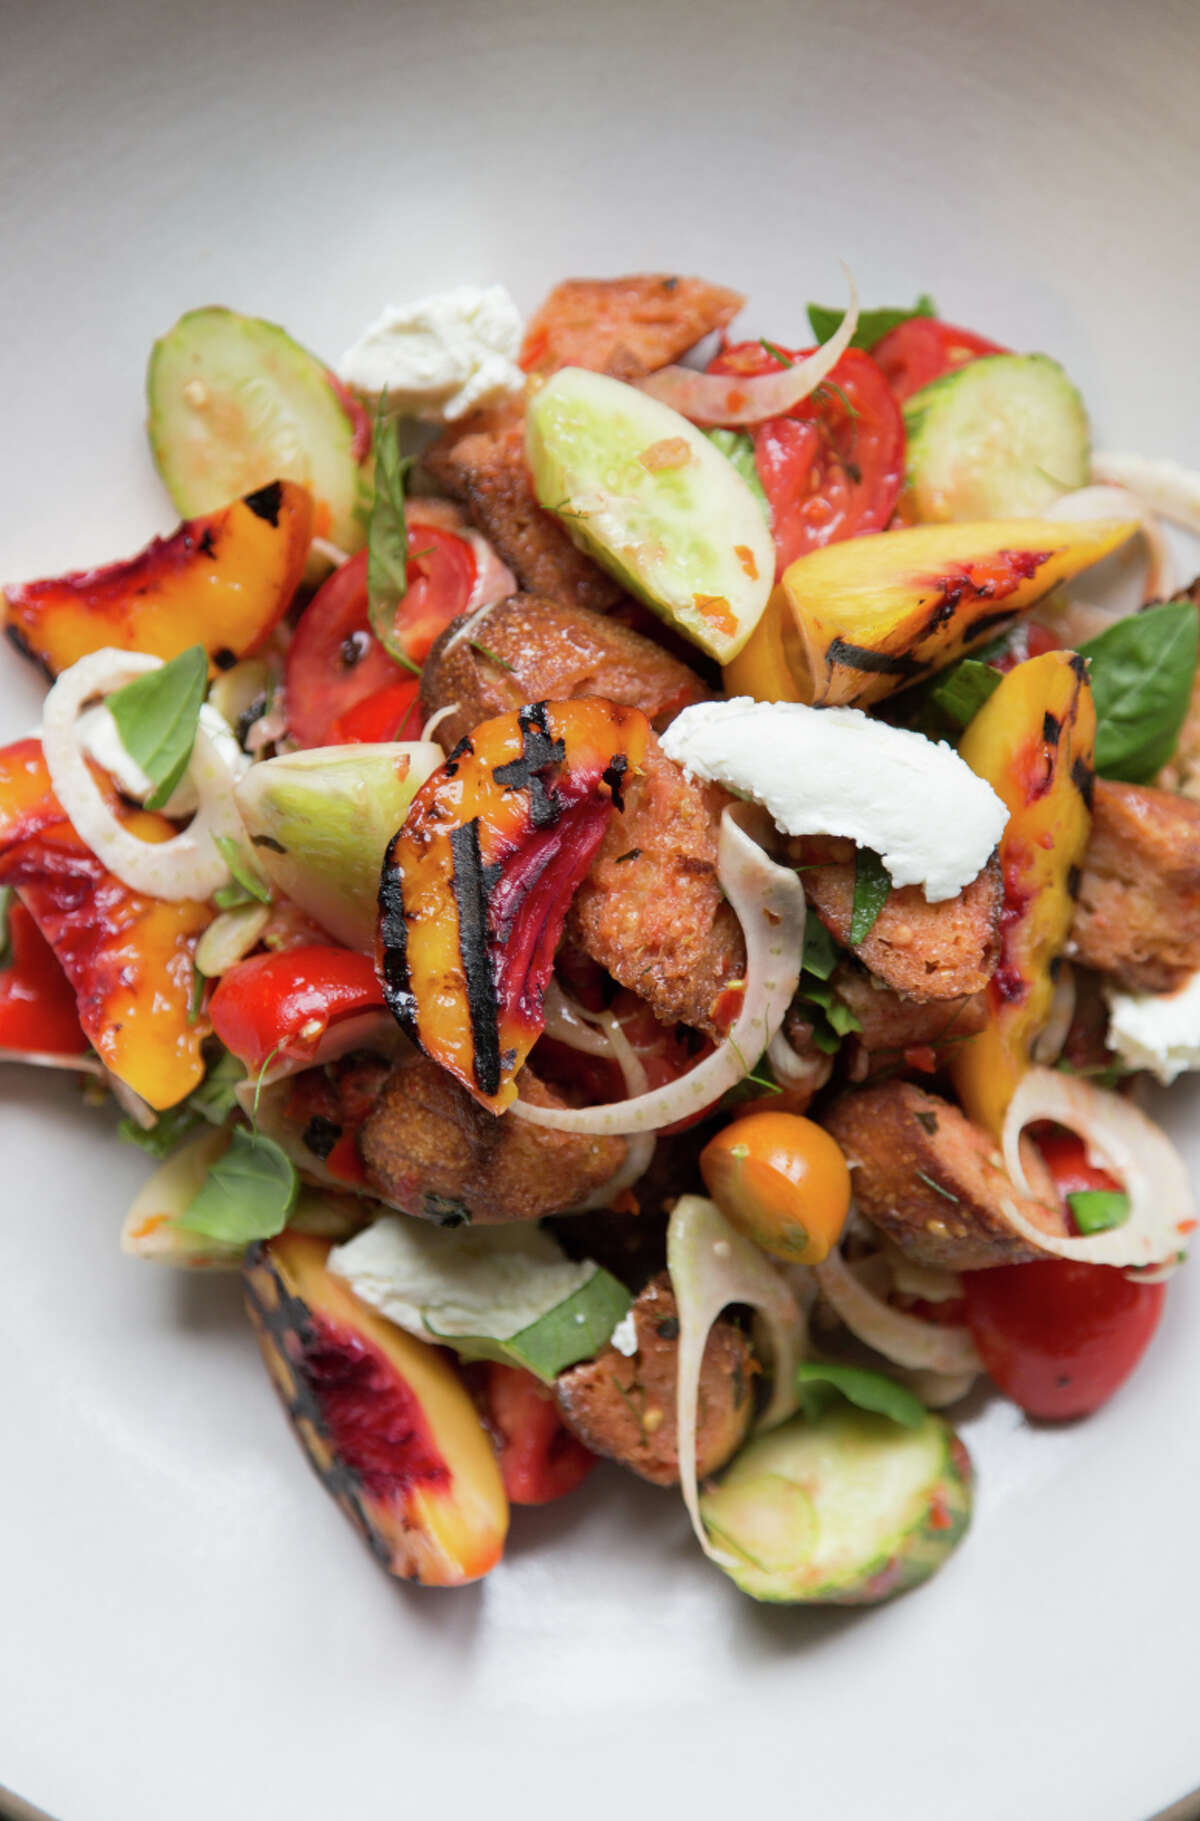 A panzanella salad made by Melissa Perello, chef at Frances restaurant, at her home in San Francisco, Calif., Thursday, July 31, 2014